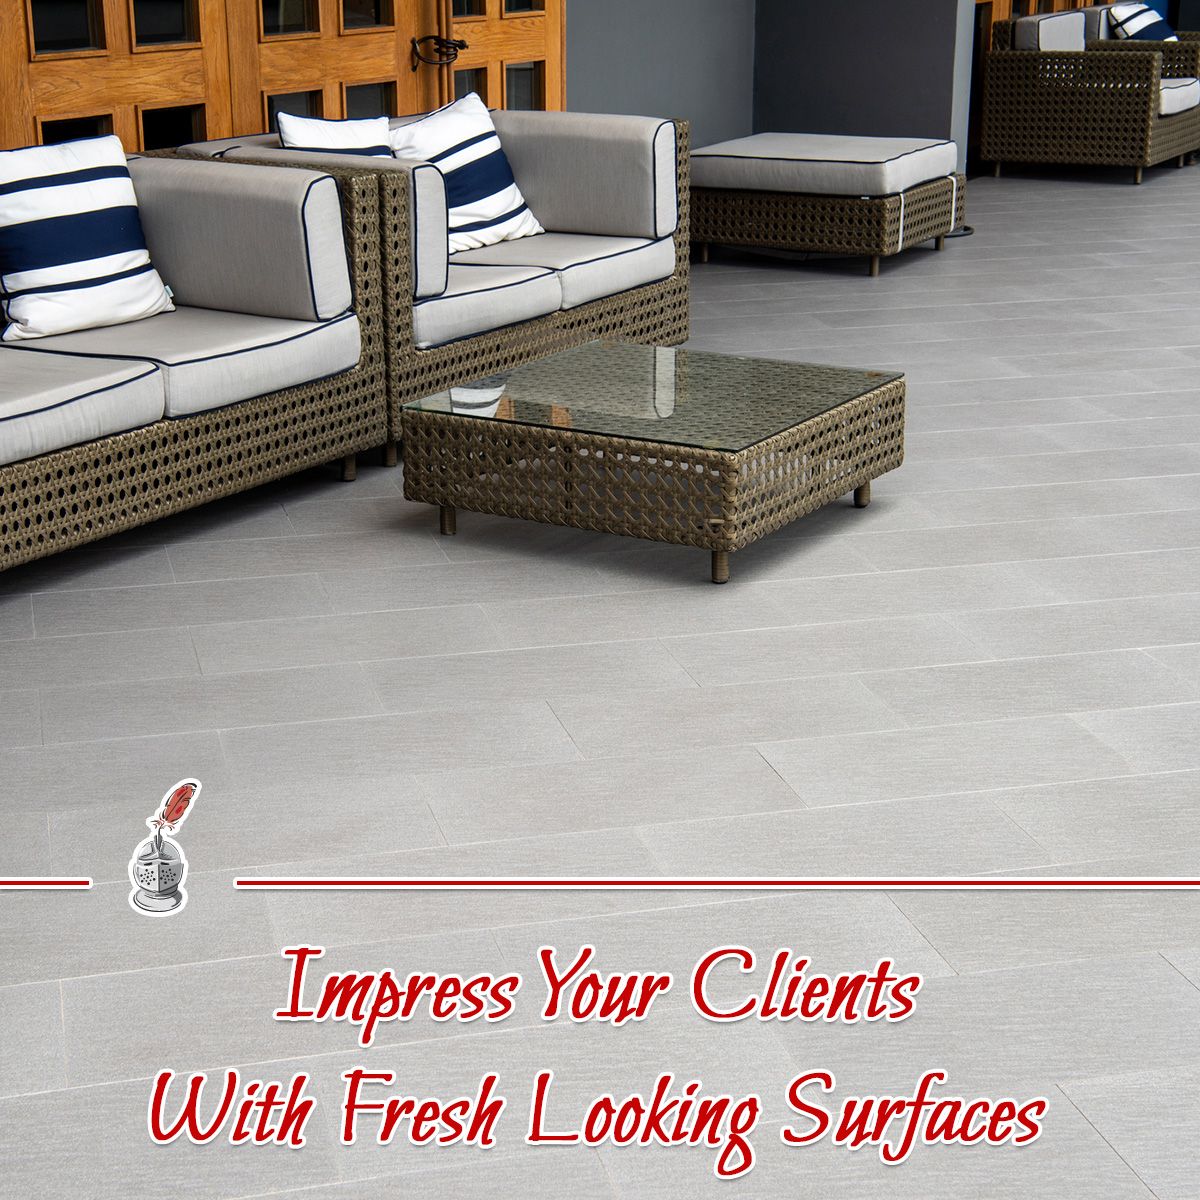 Impress Your Clients With Fresh Looking Surfaces